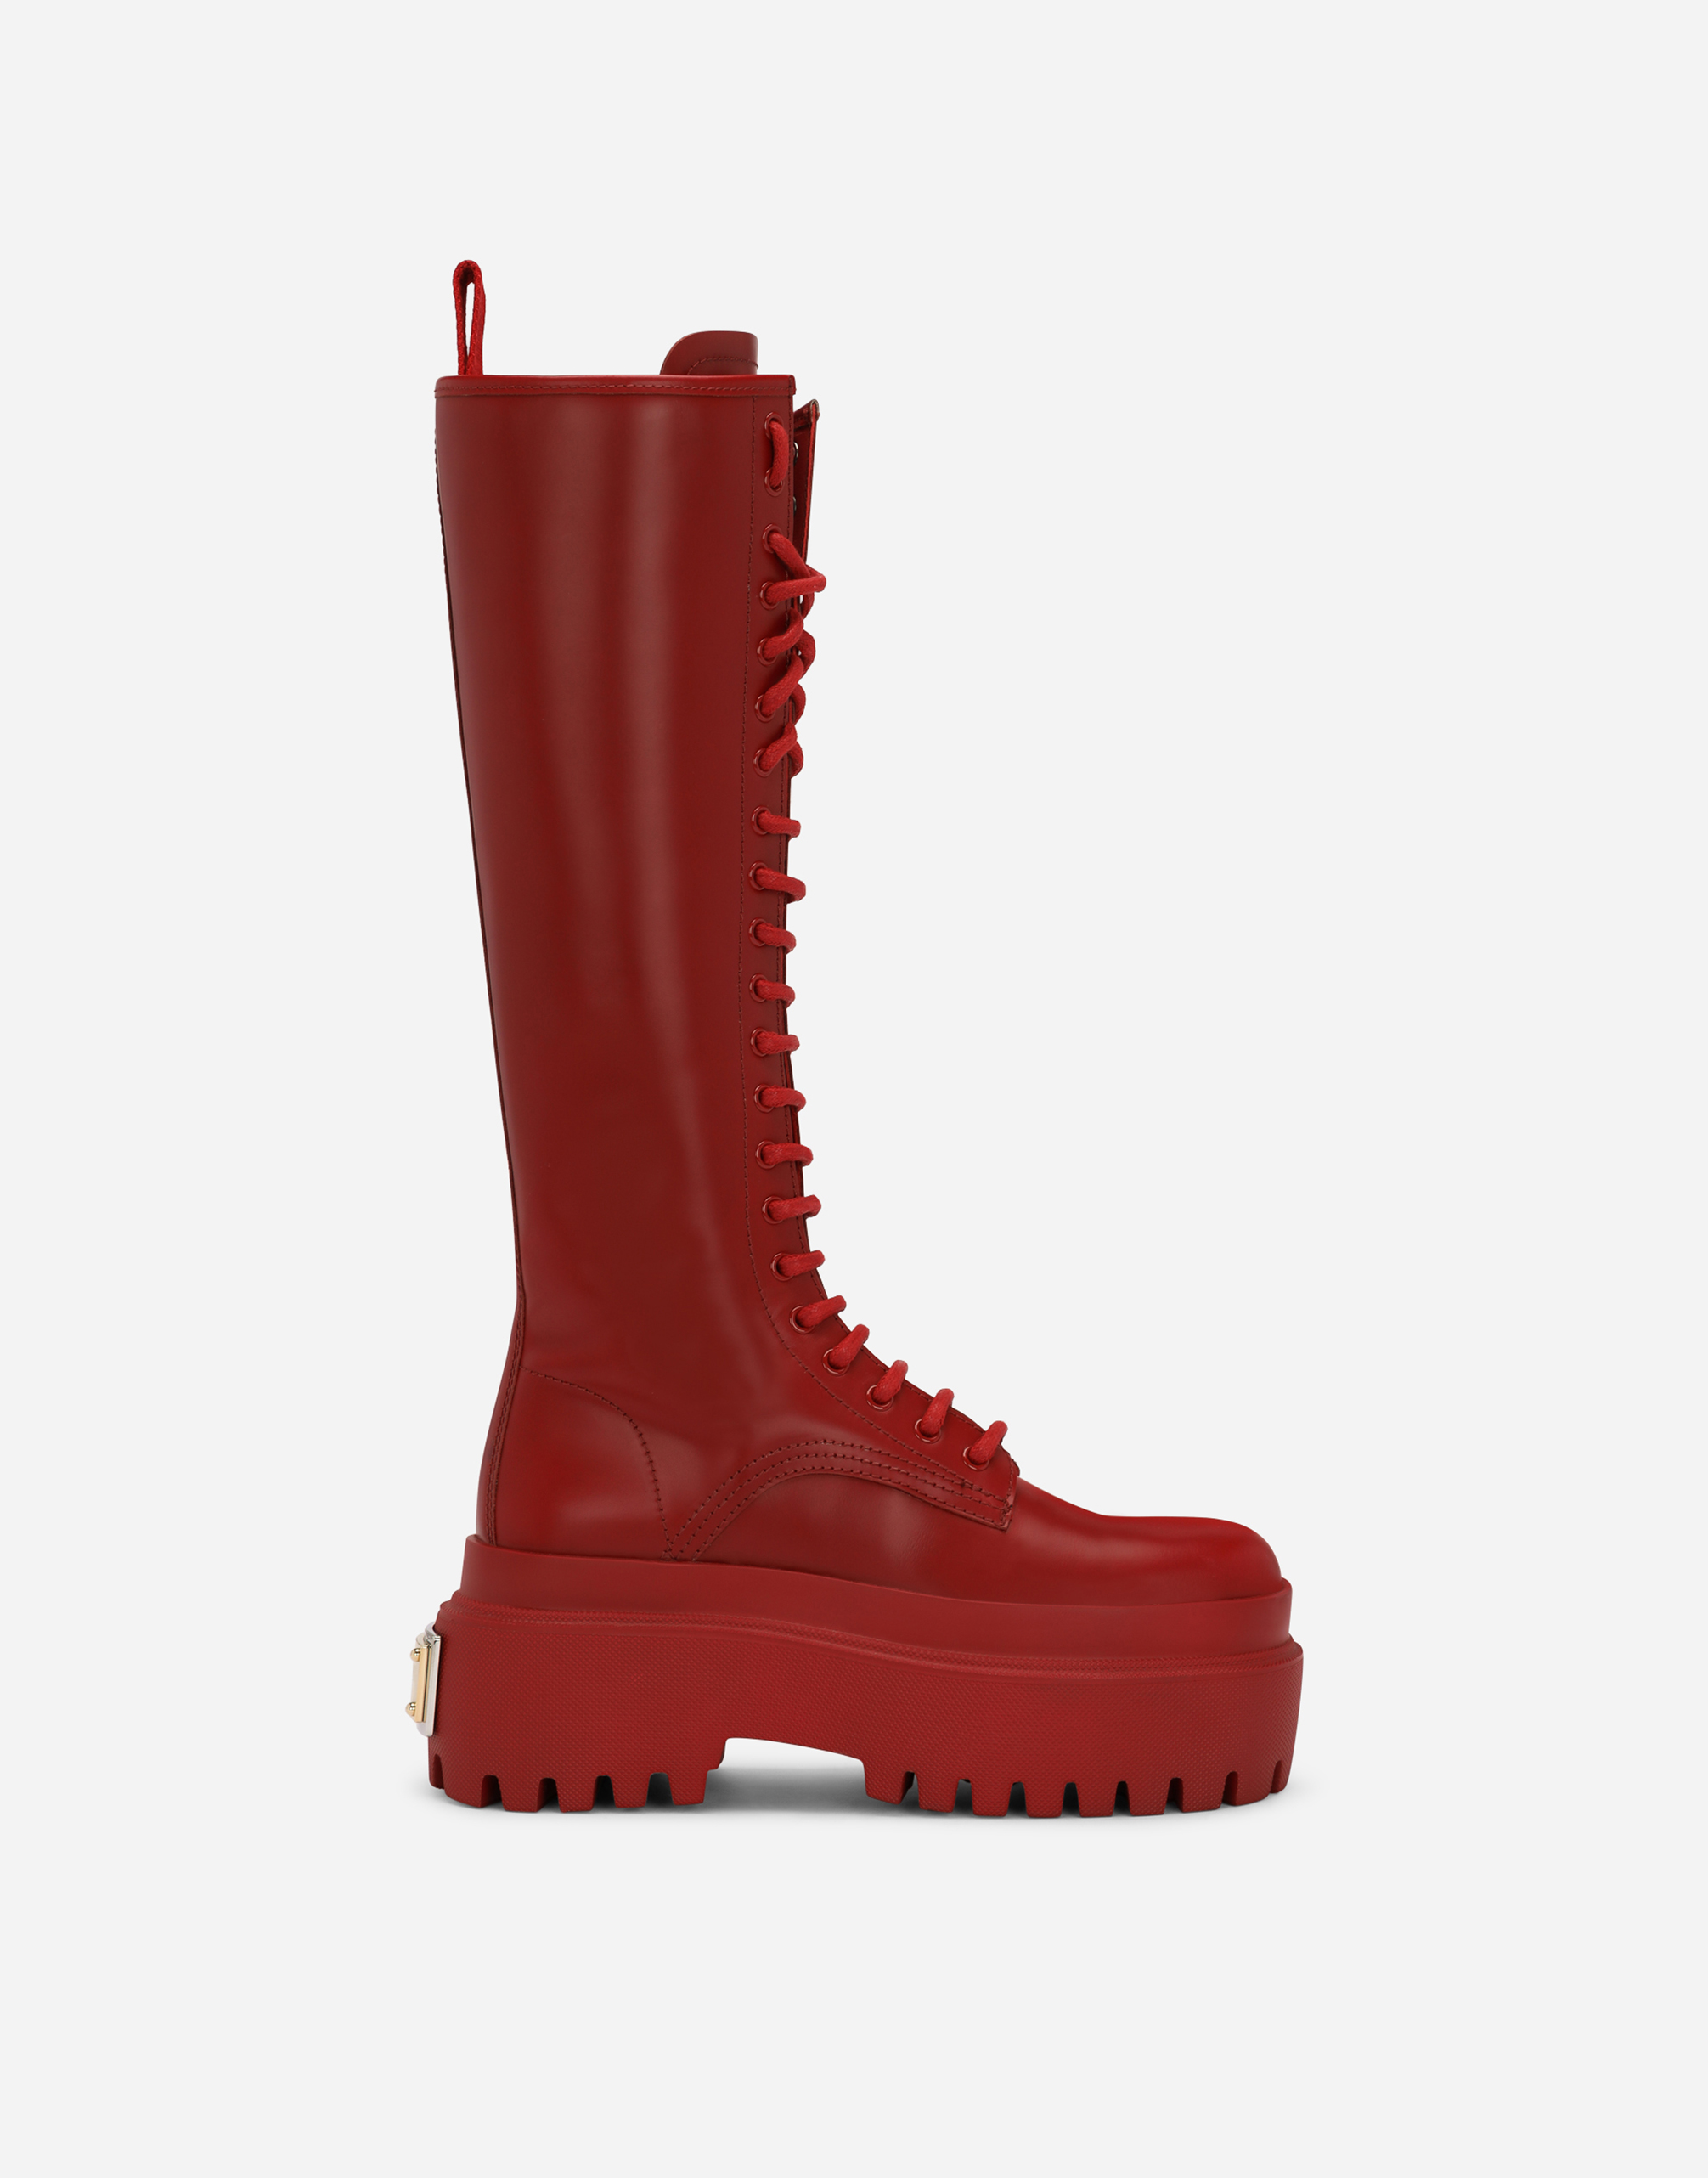 Brushed calfskin boots in Red